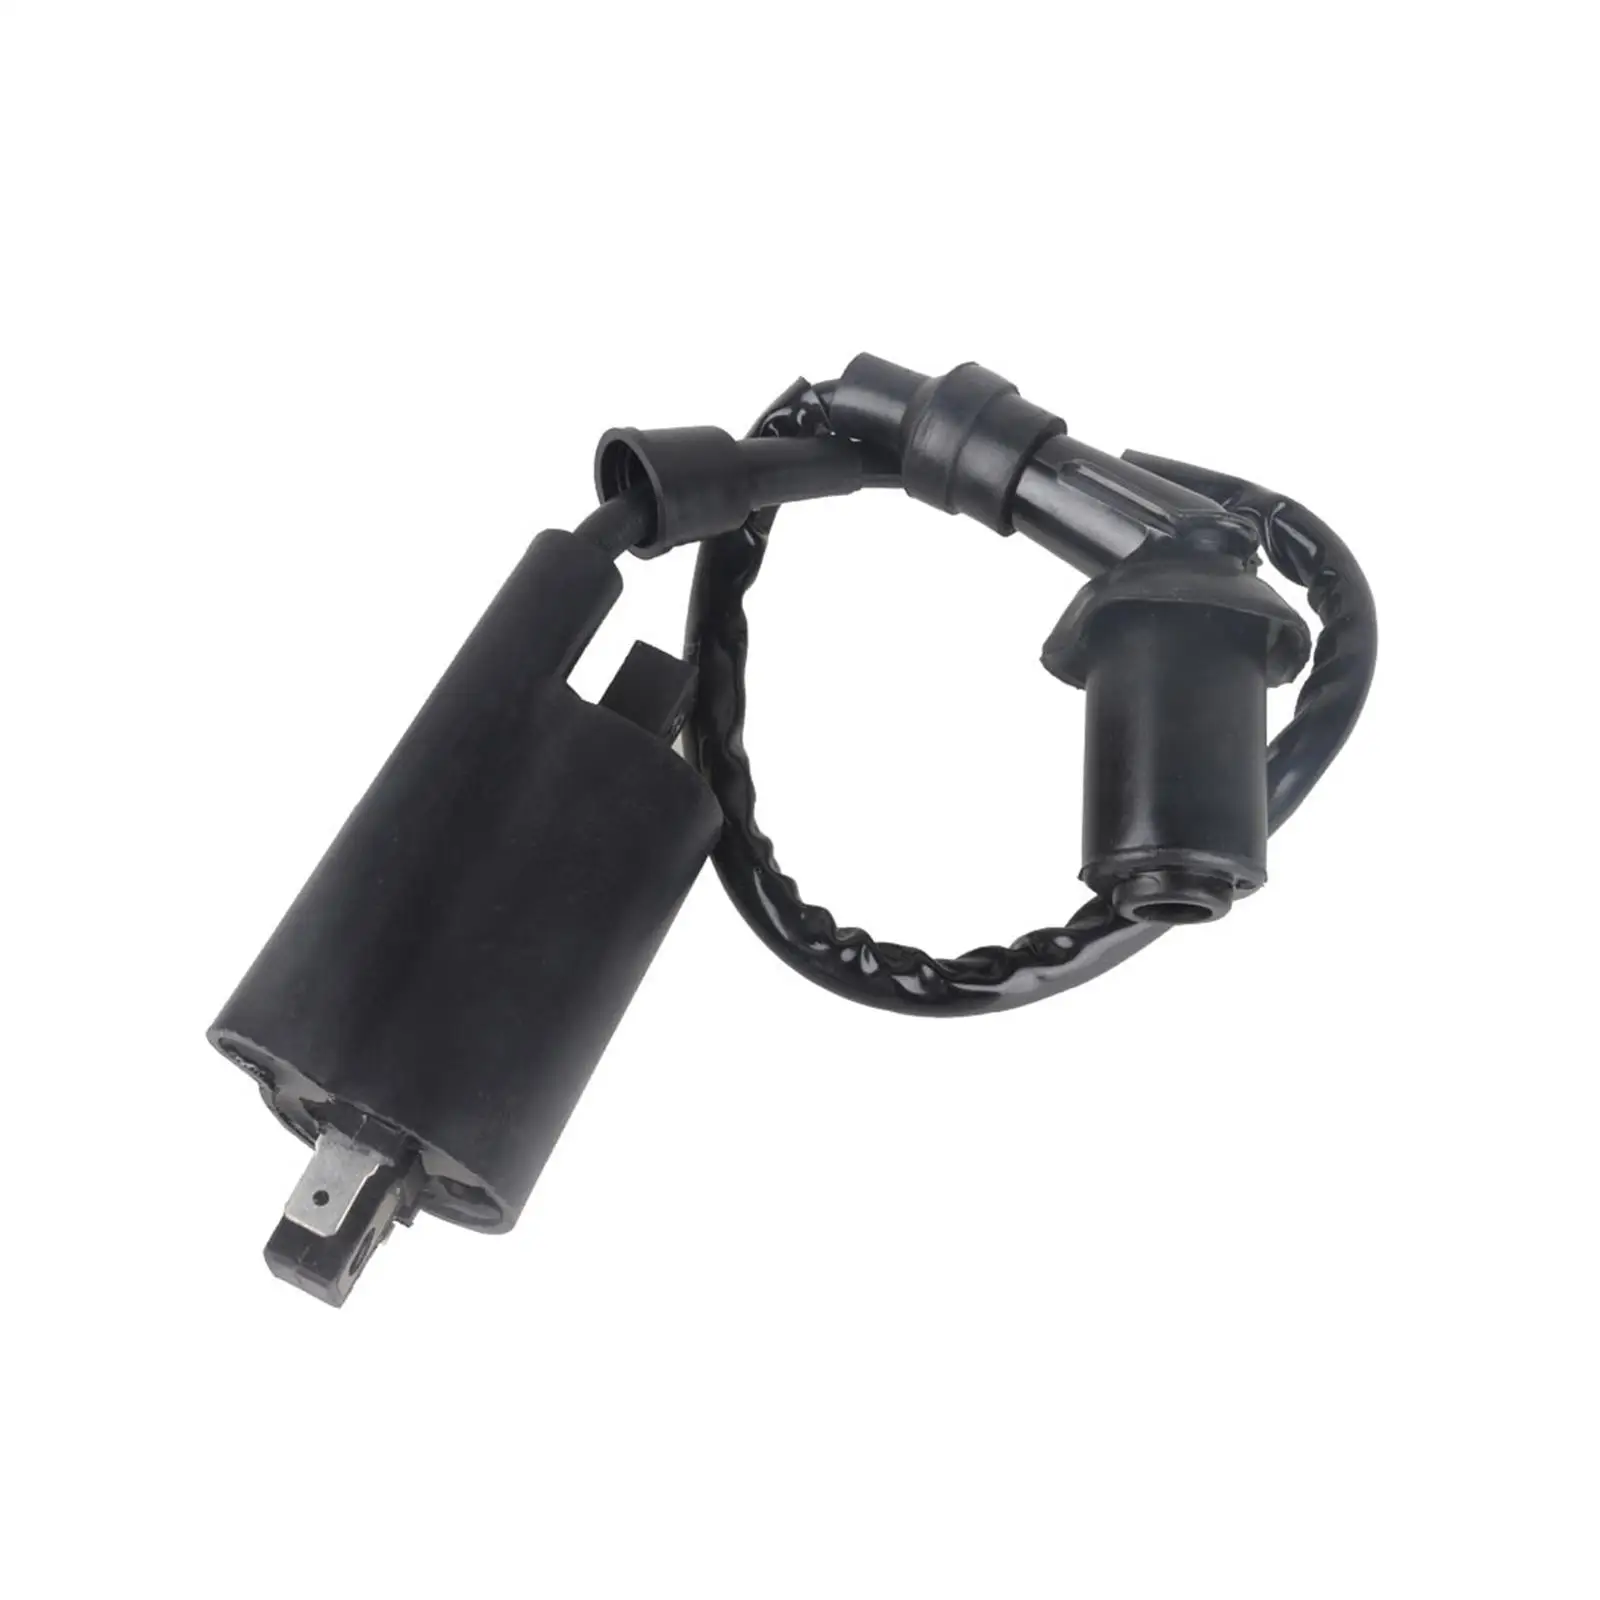 Motorcycle Ignition Coil Motorbike Accessories for V-star250 1995-2007